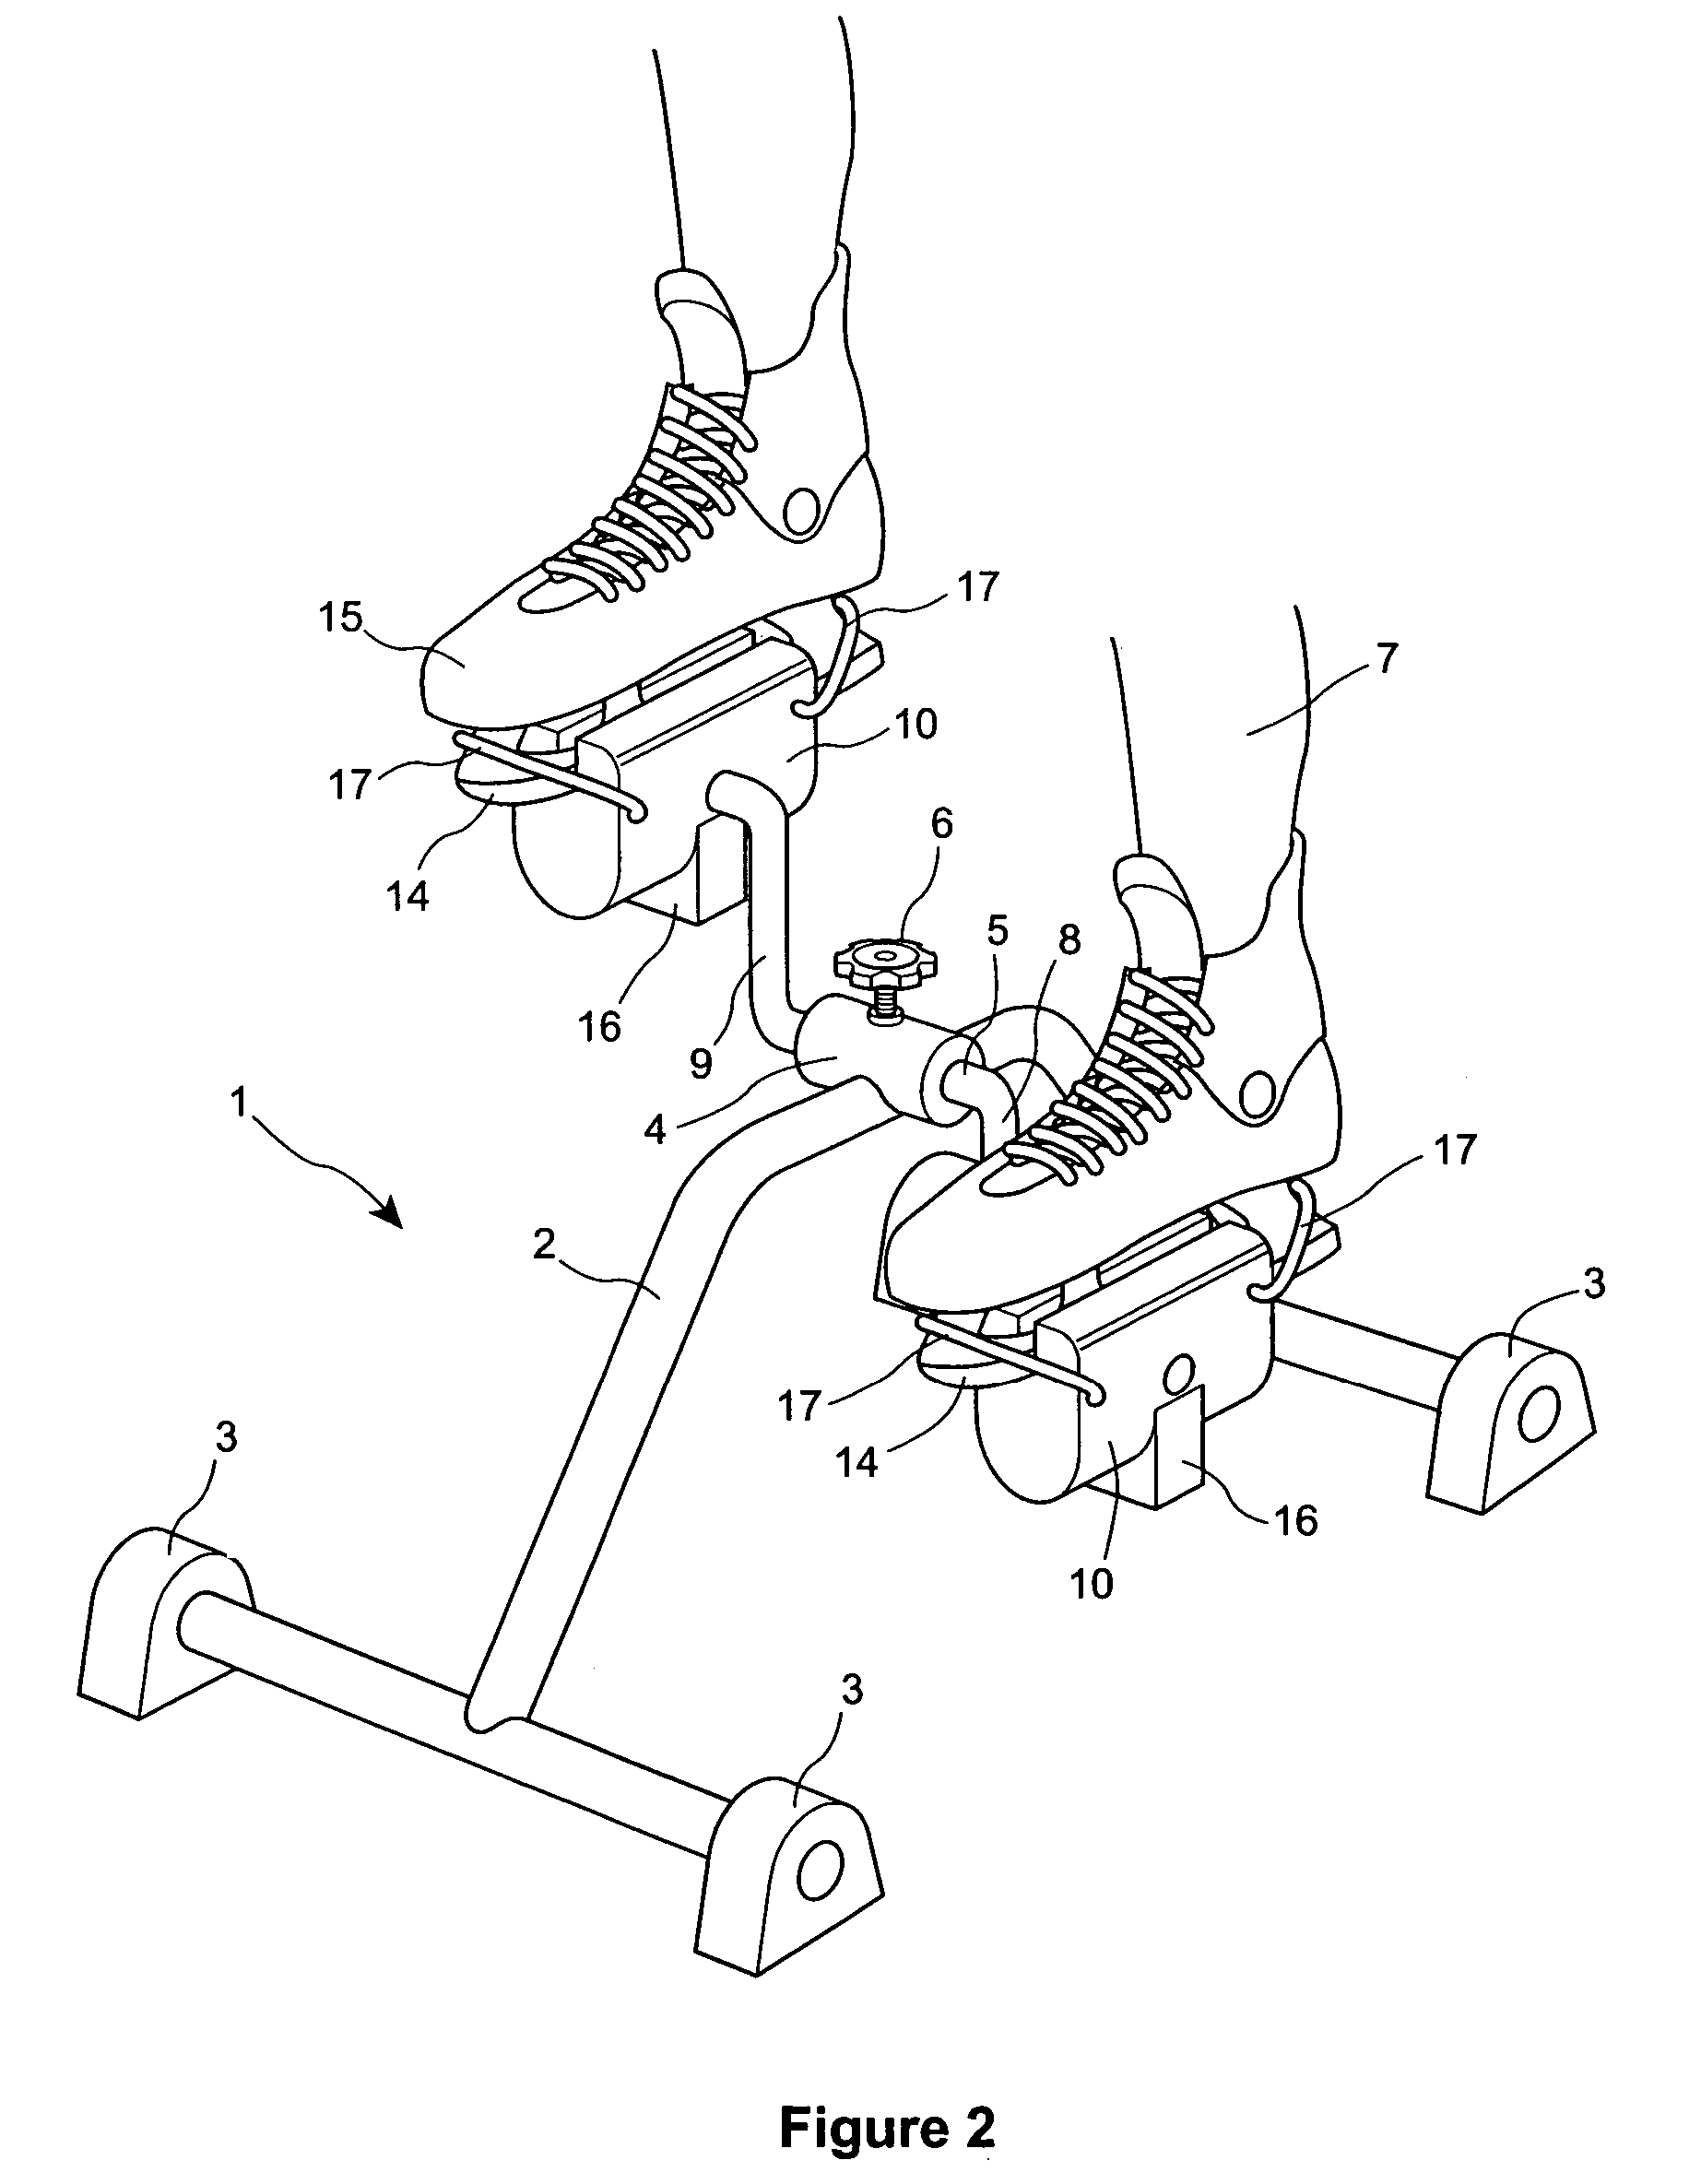 Portable exercise device and method of preventing lactic-acid build-up